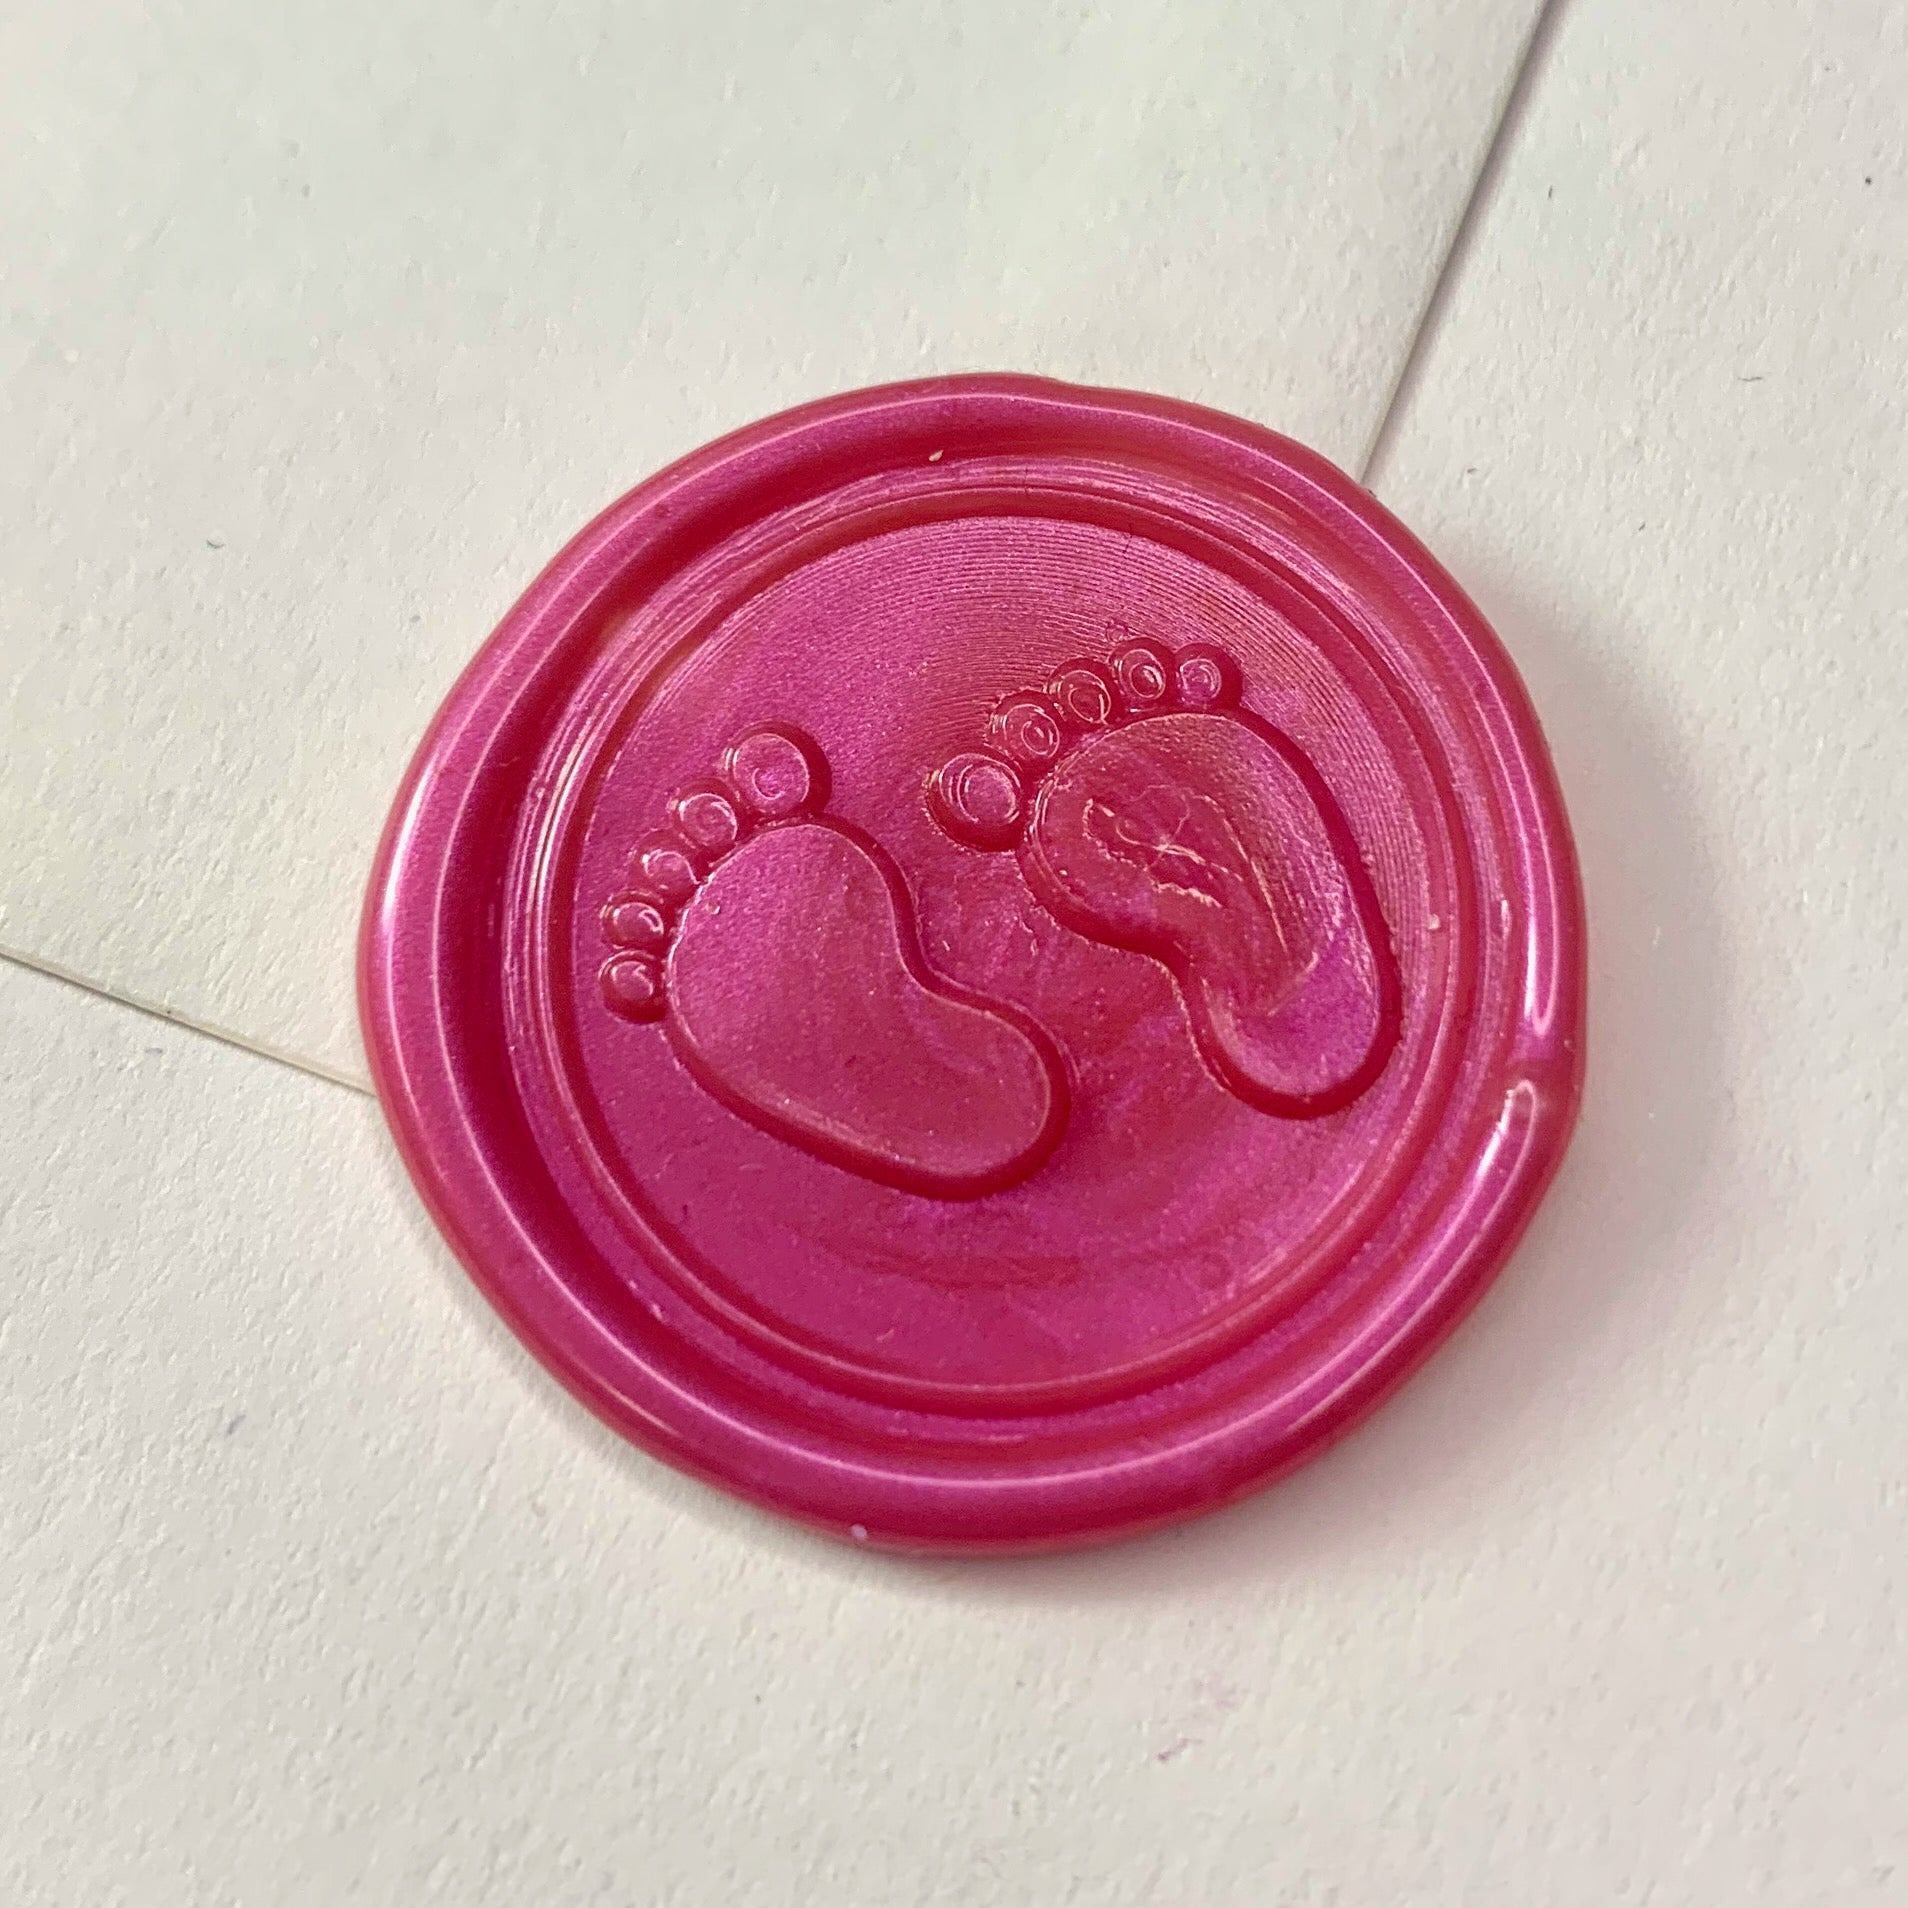 baby feet in pink wax seal on white envelope